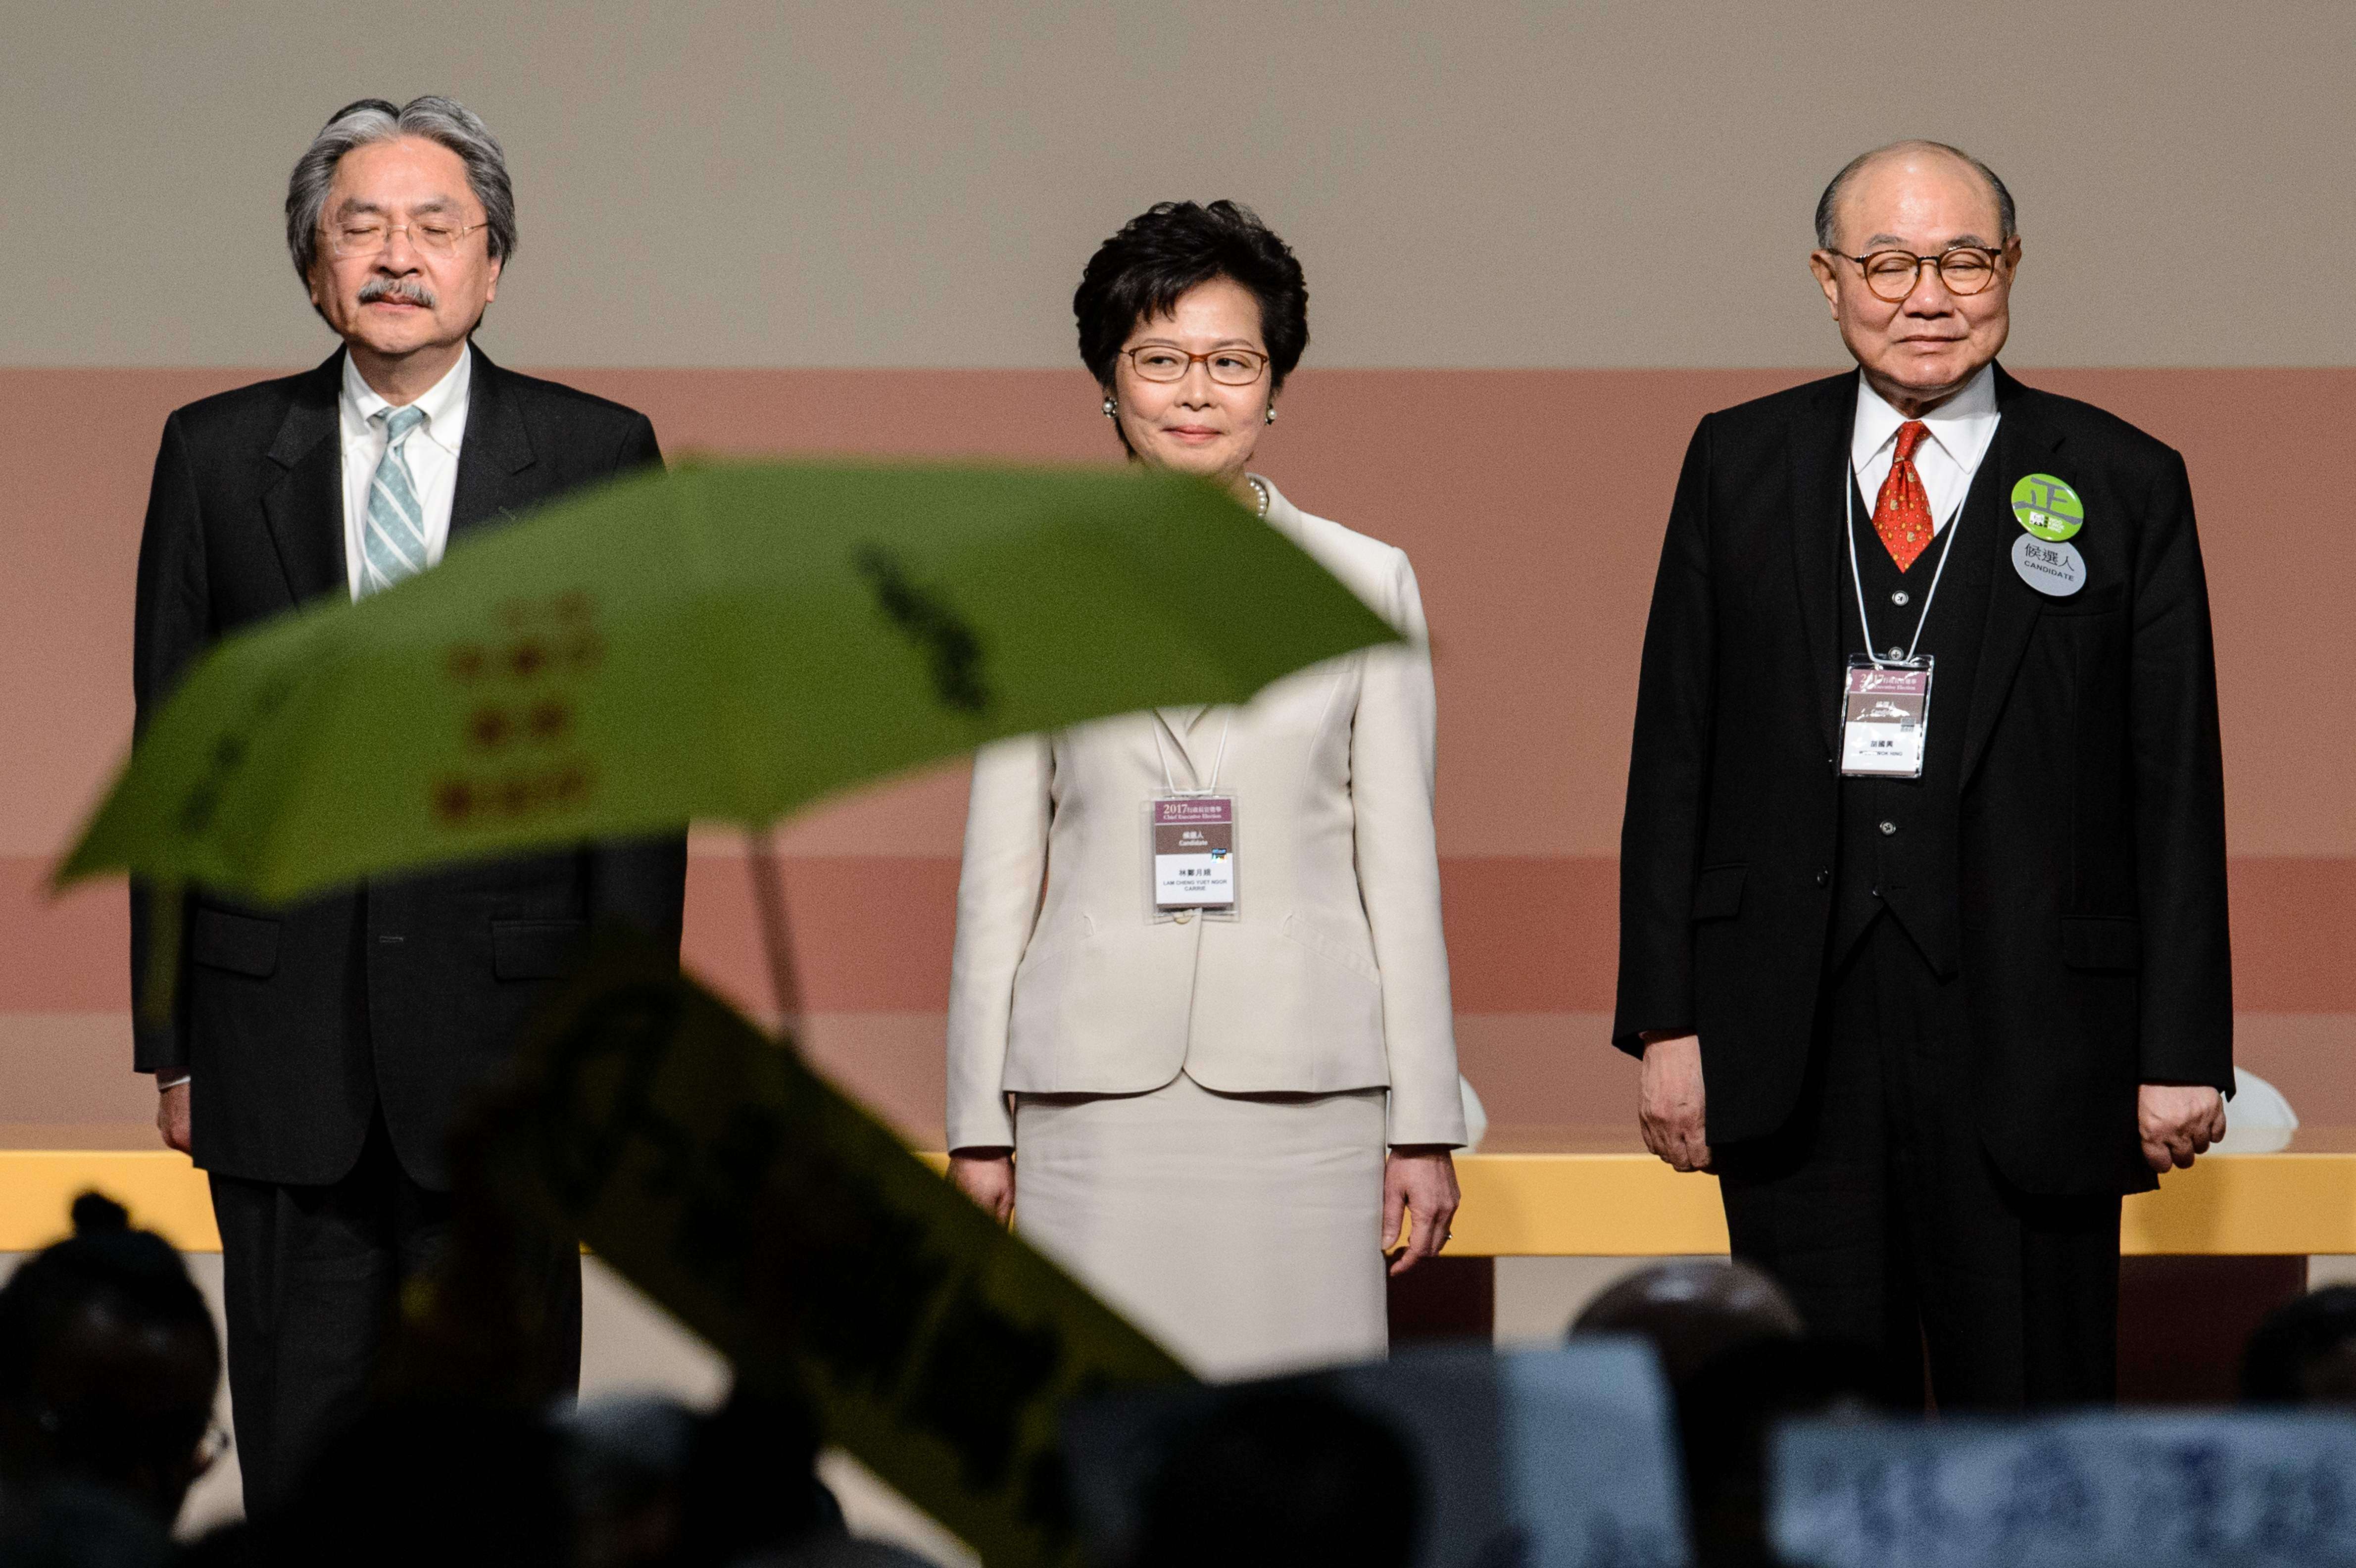 A pro-democracy protester holds up an umbrella after Carrie Lam was declared the winner of the chief executive election on March 26, as she stands flanked by losing candidates John Tsang (left) and Woo Kwok-hing. Photo: AFP